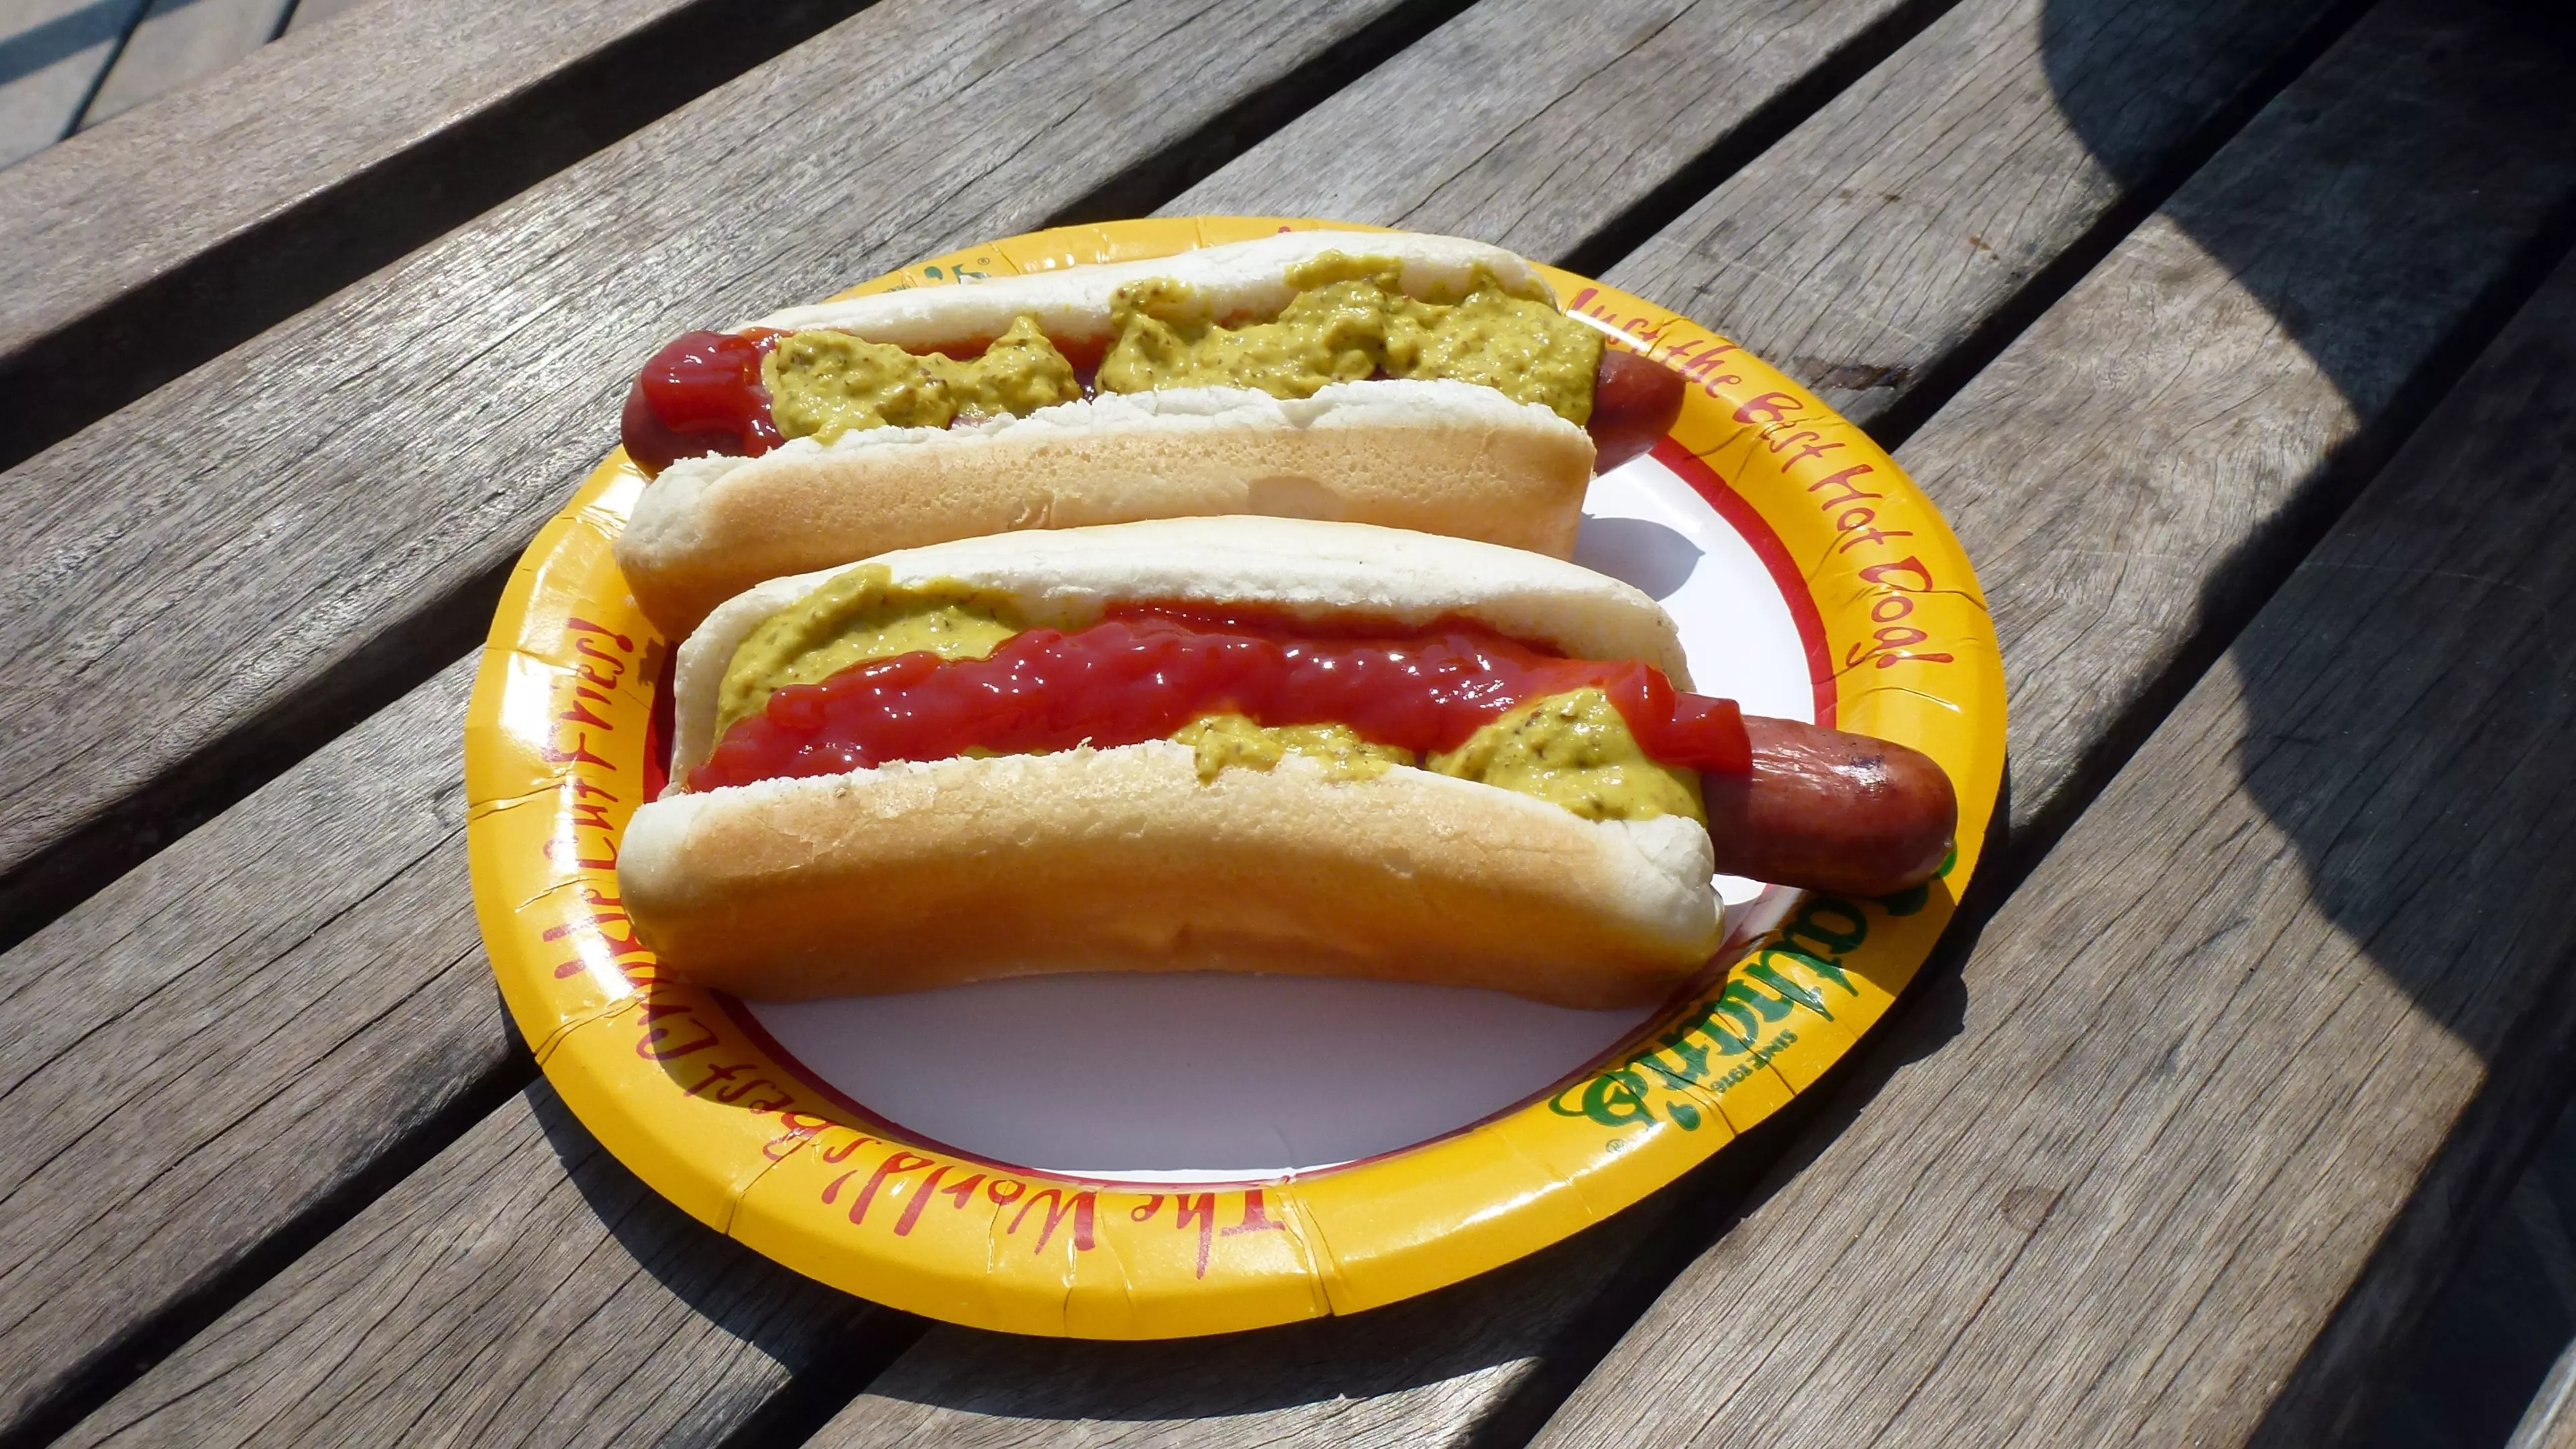 Every Hot Dog Takes 36 Minutes Off Your Life, Study Suggests